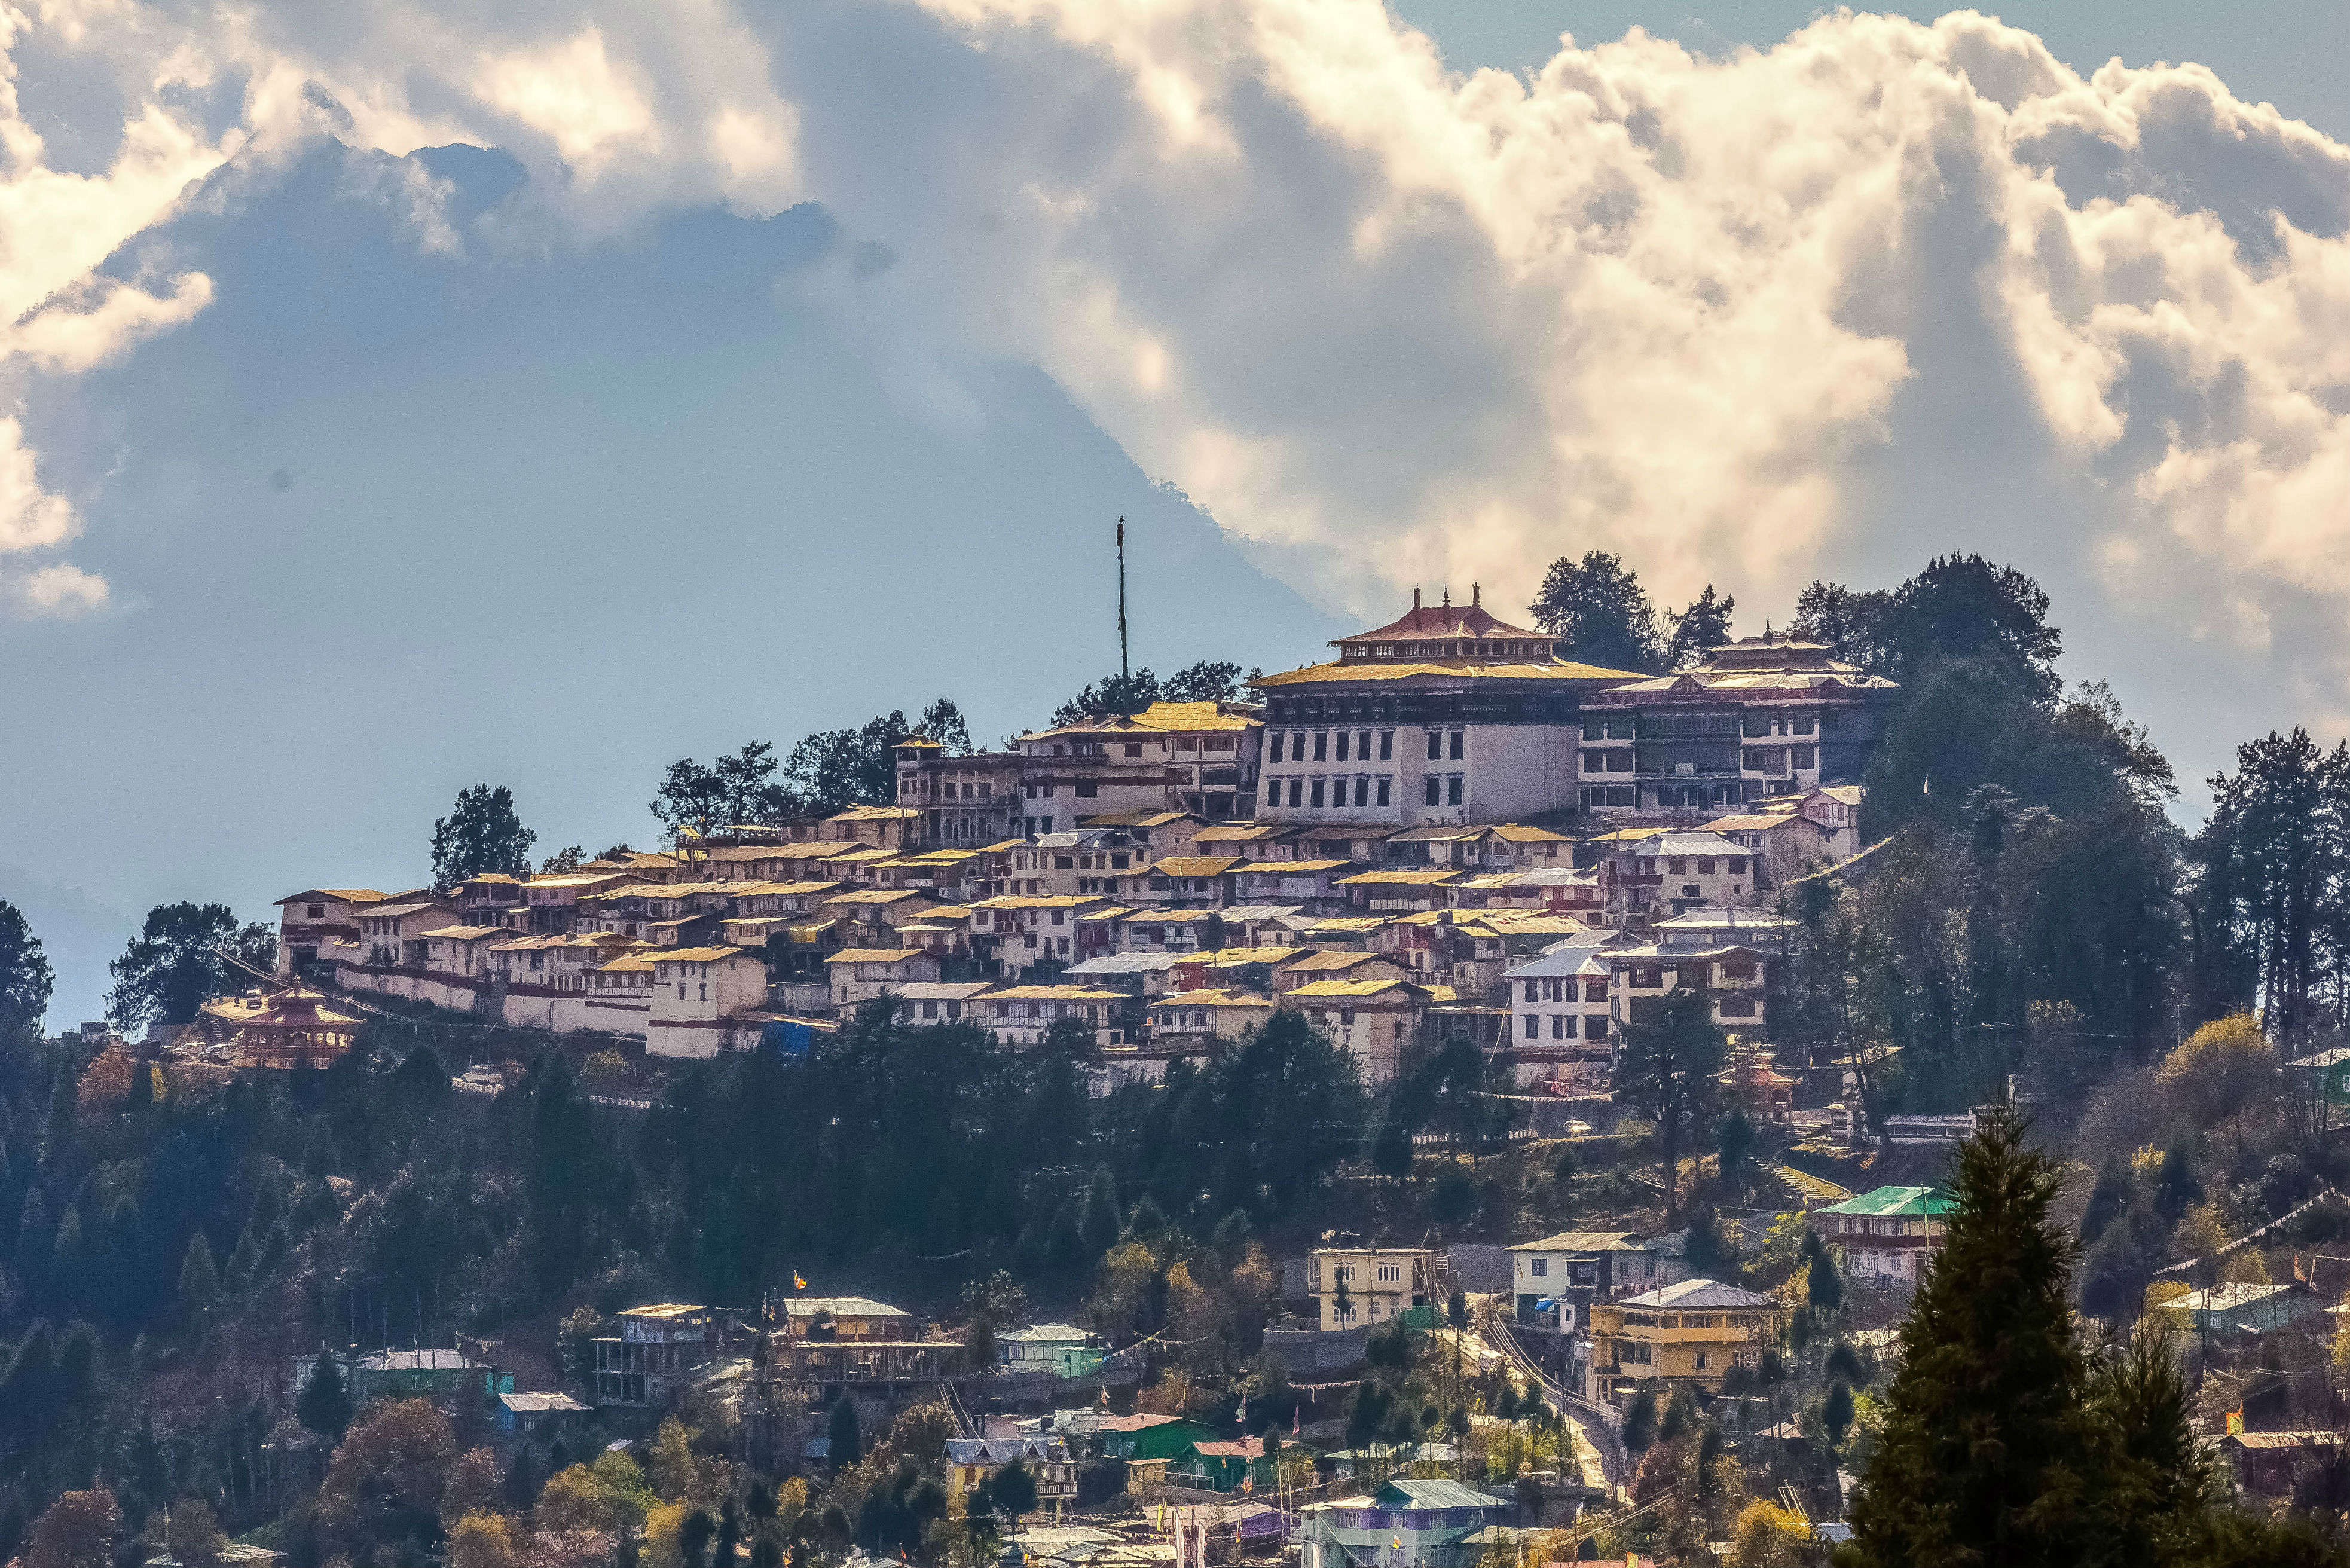 Tawang Festival: book your tickets to this astounding cultural feast